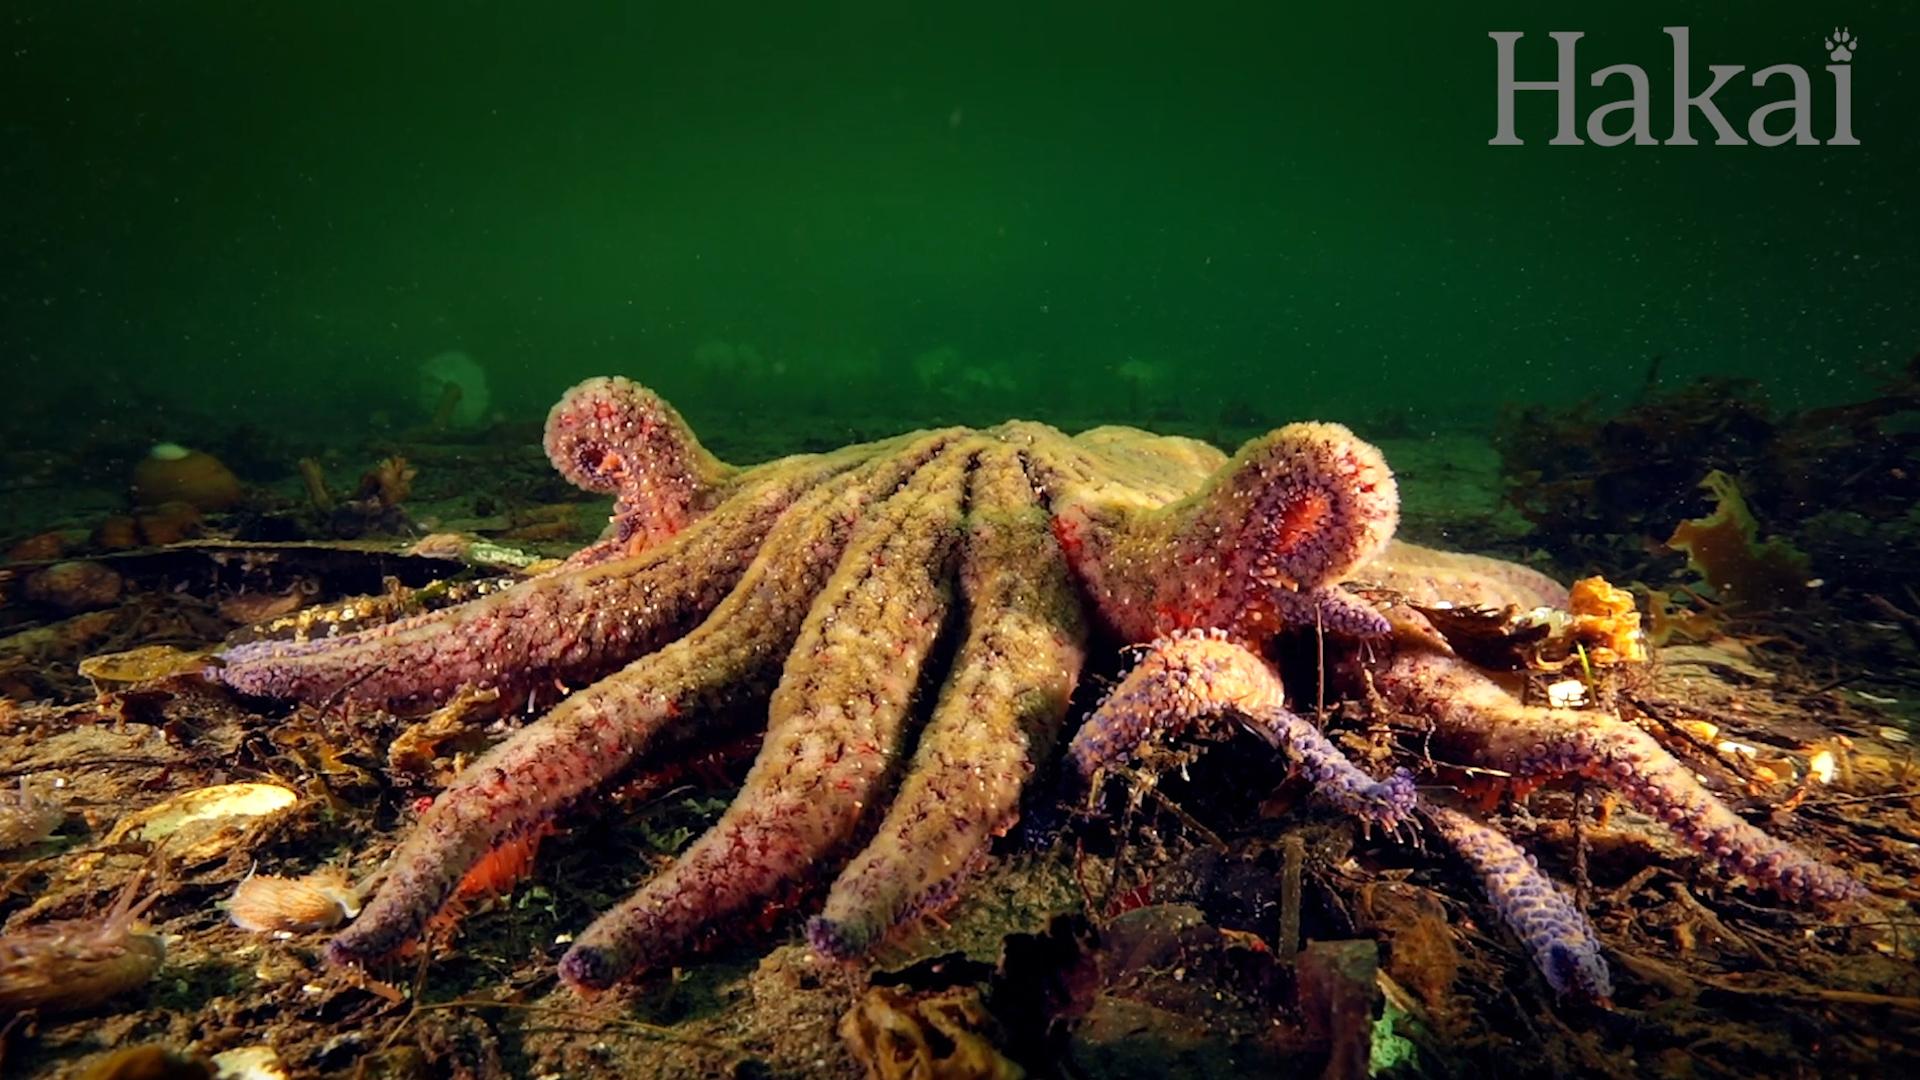 These sea stars are vanishing from the Pacific Ocean